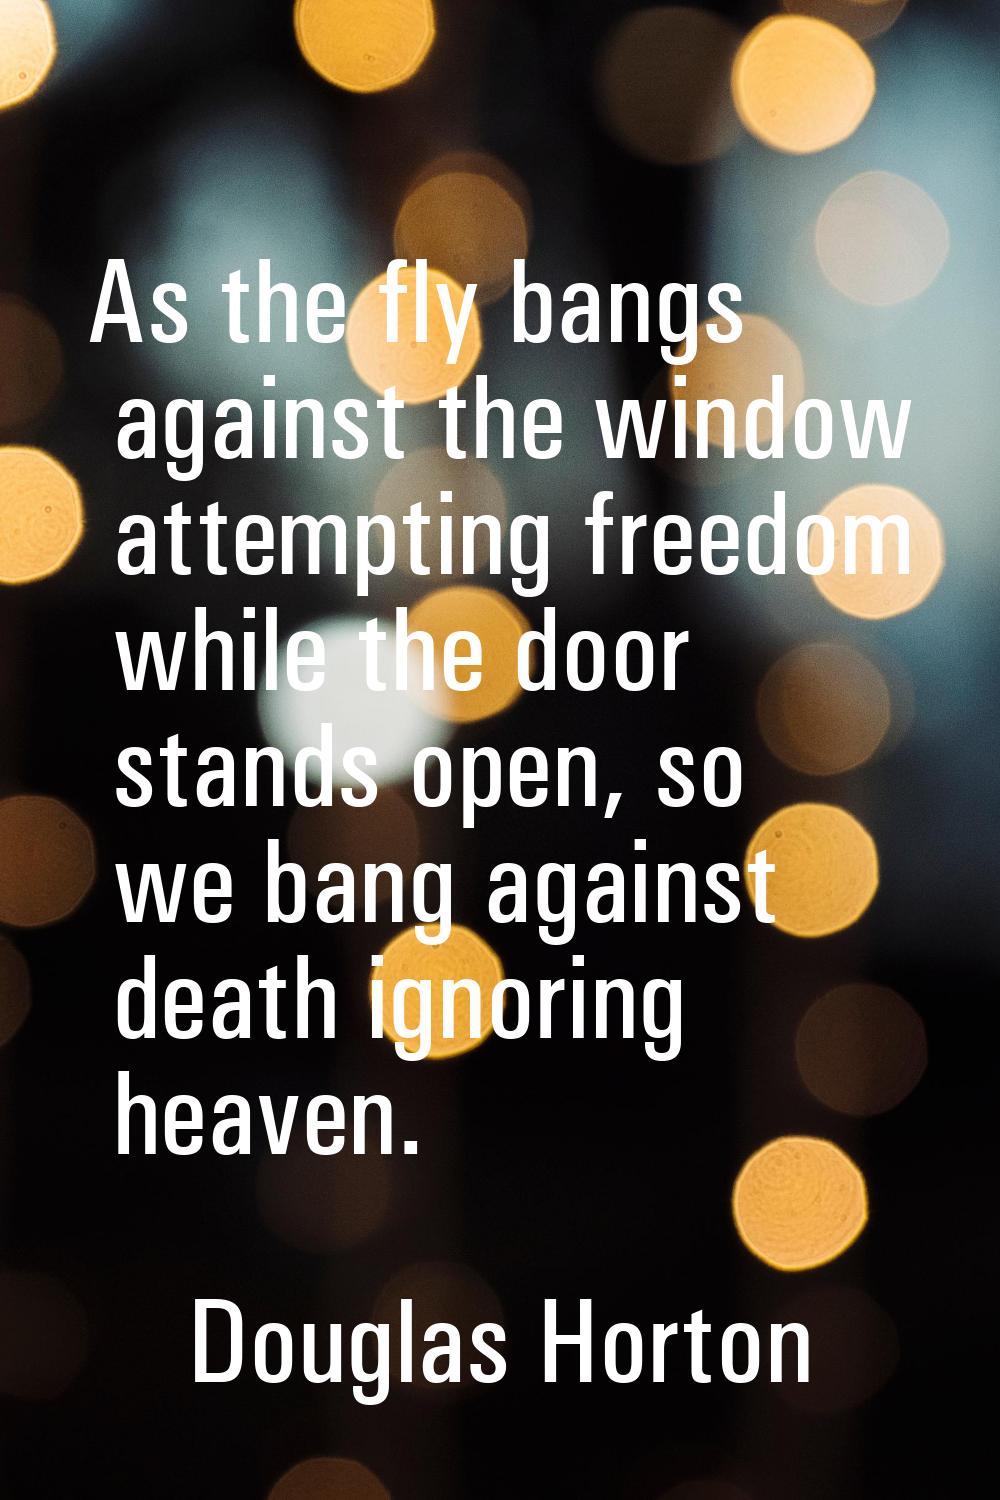 As the fly bangs against the window attempting freedom while the door stands open, so we bang again